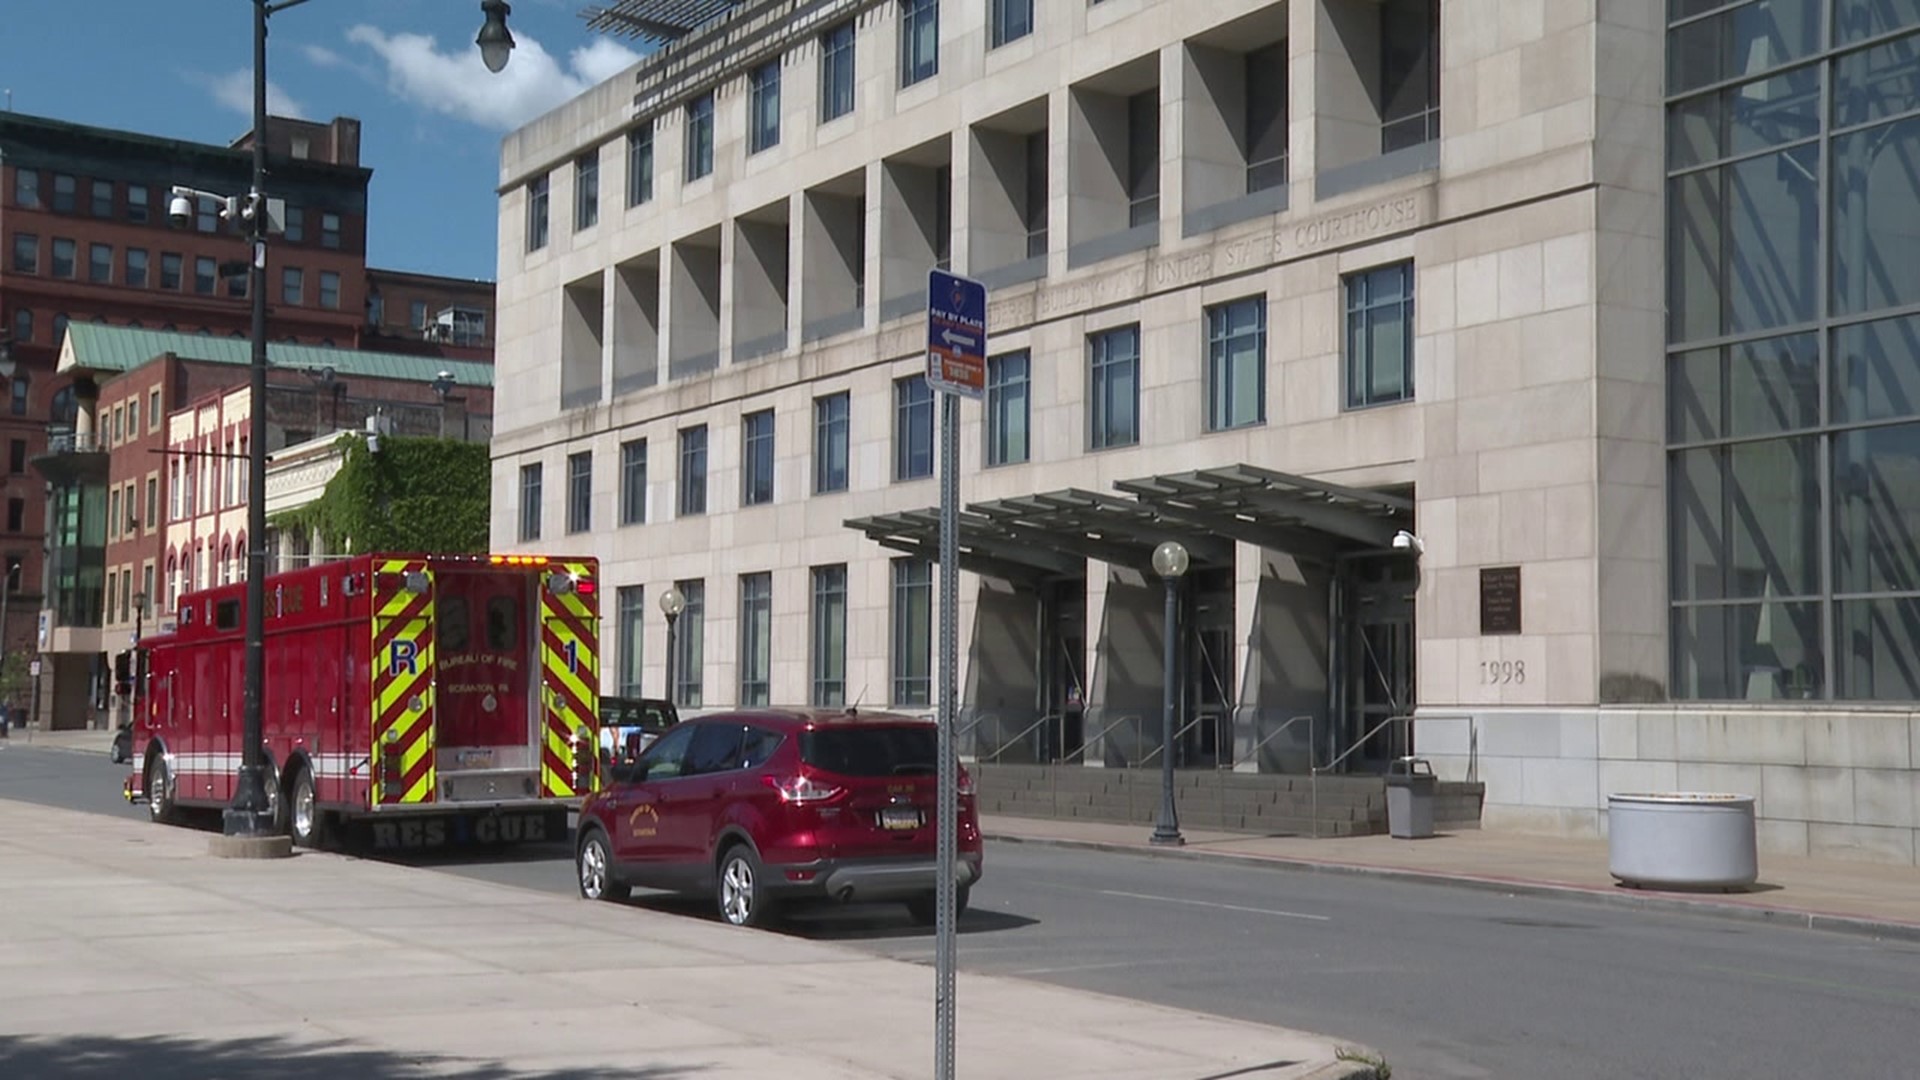 An investigation is underway in Lackawanna County after an envelope with powder inside was discovered at the federal courthouse.